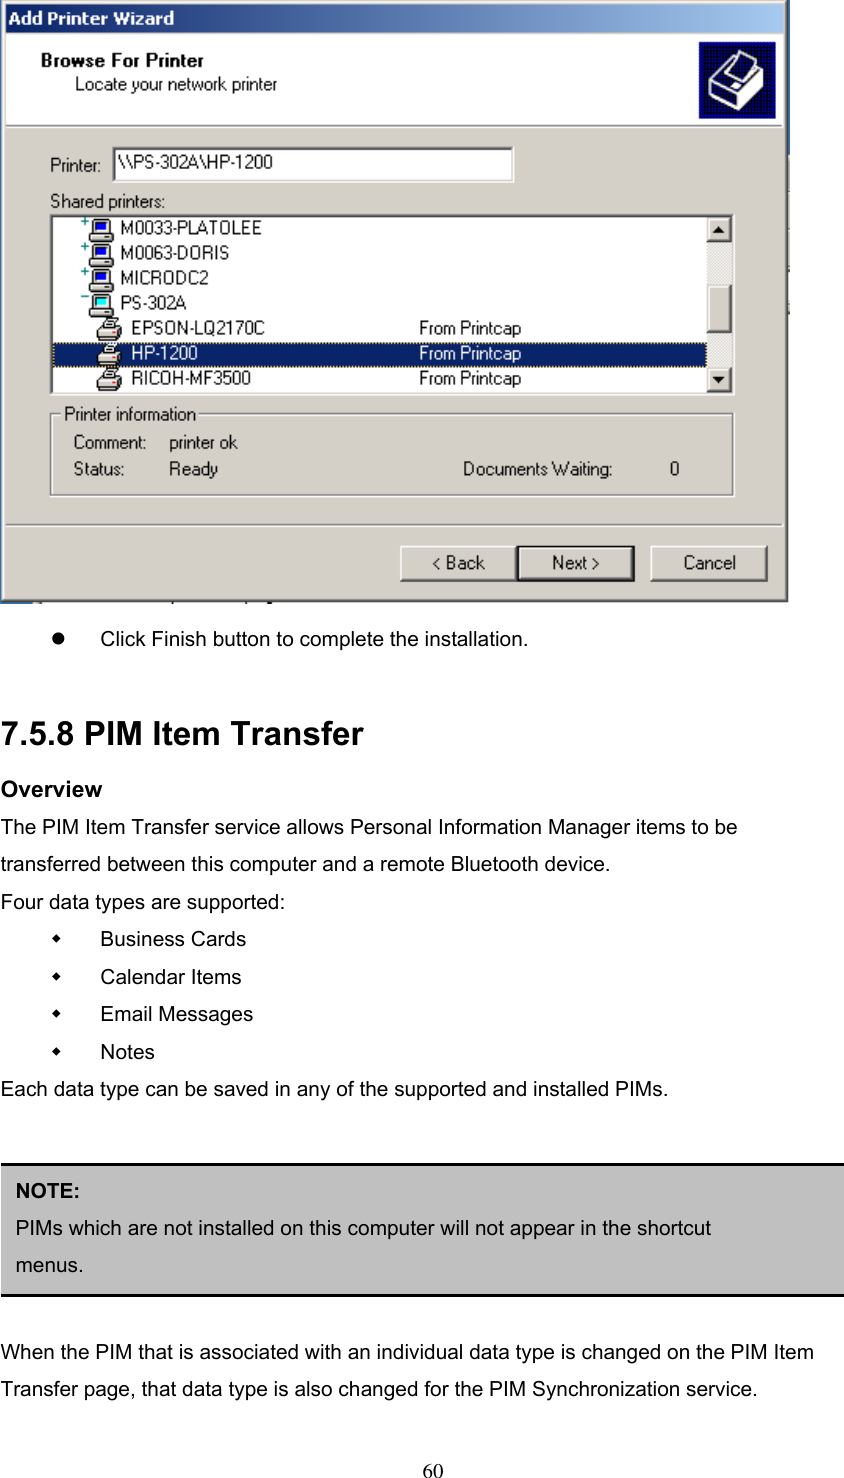    Click Finish button to complete the installation.    7.5.8 PIM Item Transfer Overview The PIM Item Transfer service allows Personal Information Manager items to be transferred between this computer and a remote Bluetooth device. Four data types are supported:   Business Cards   Calendar Items   Email Messages   Notes Each data type can be saved in any of the supported and installed PIMs.       NOTE:  PIMs which are not installed on this computer will not appear in the shortcut menus. When the PIM that is associated with an individual data type is changed on the PIM Item Transfer page, that data type is also changed for the PIM Synchronization service.  60 